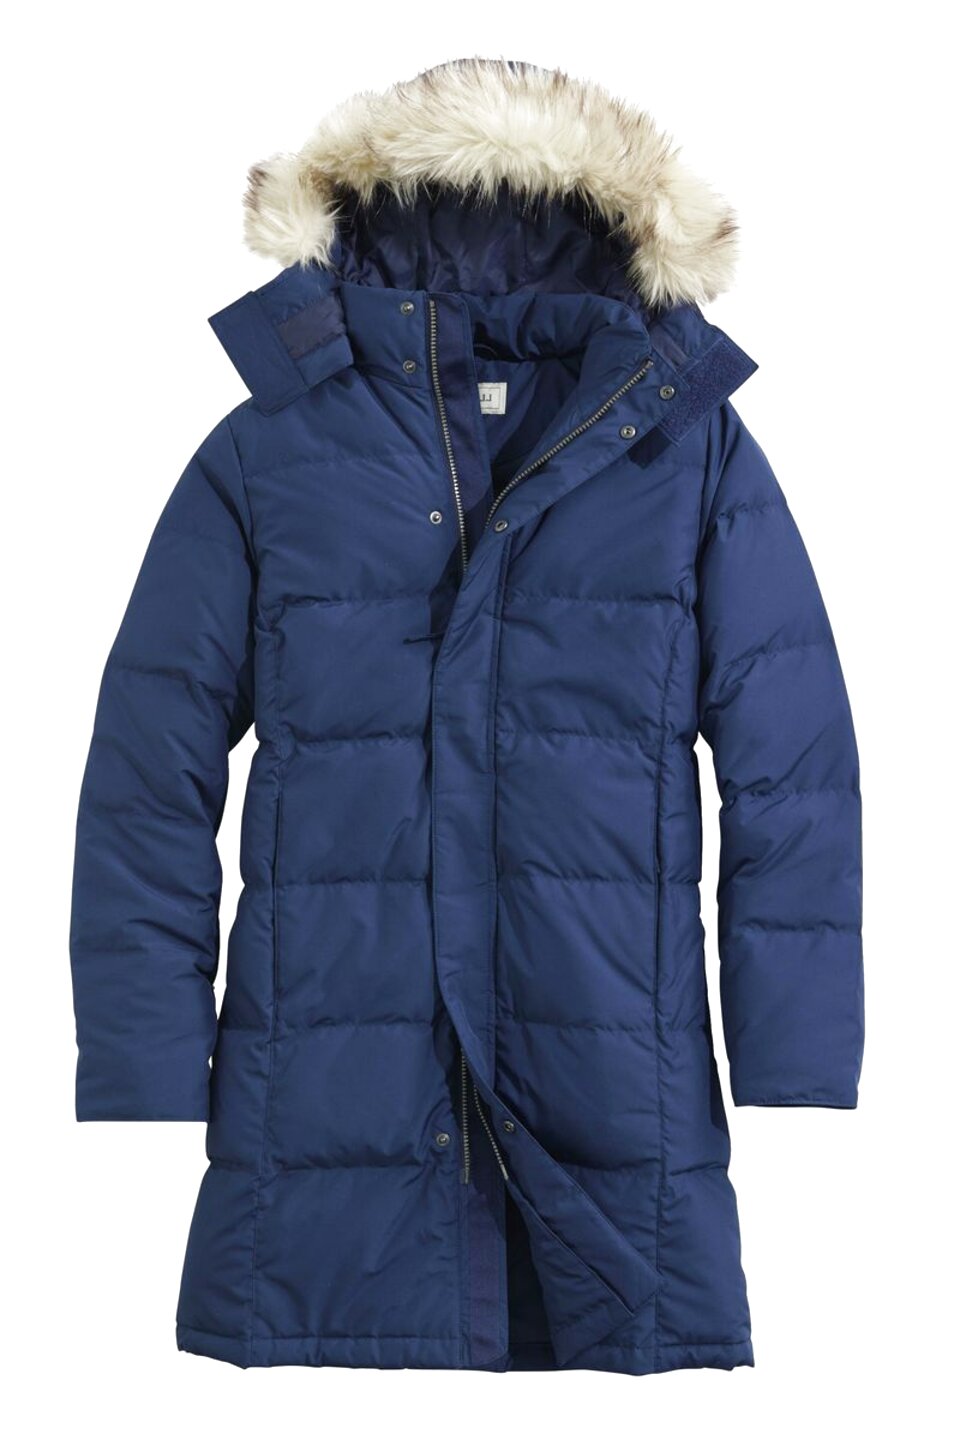 Extreme Cold Weather Coats for sale in UK | 60 used Extreme Cold ...